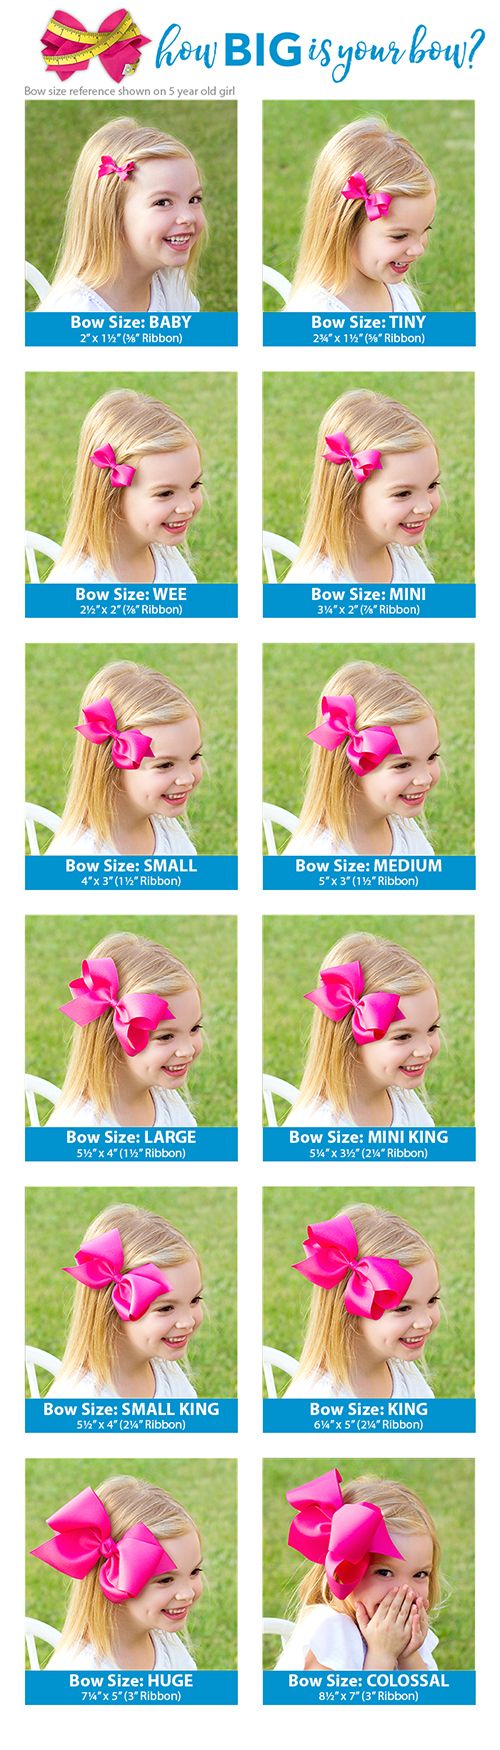 Small Classic Grosgrain Bow (Multiple Colors)